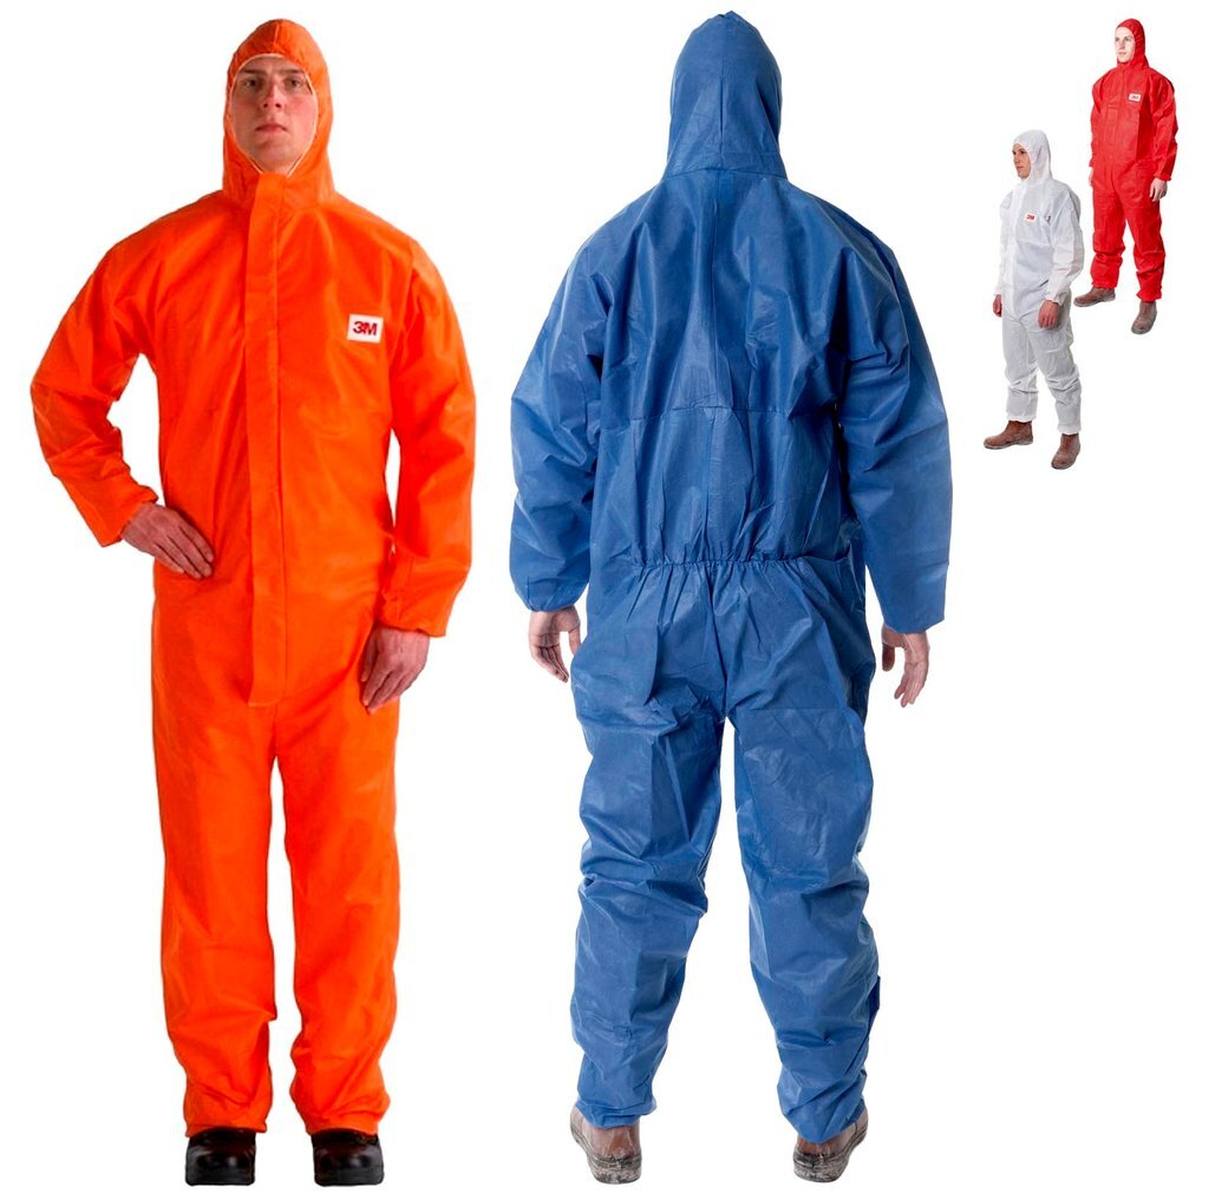 3M 4515O Protective coverall, orange, TYPE 5/6, size 3XL, material SMMS low-lint, elastic band finish